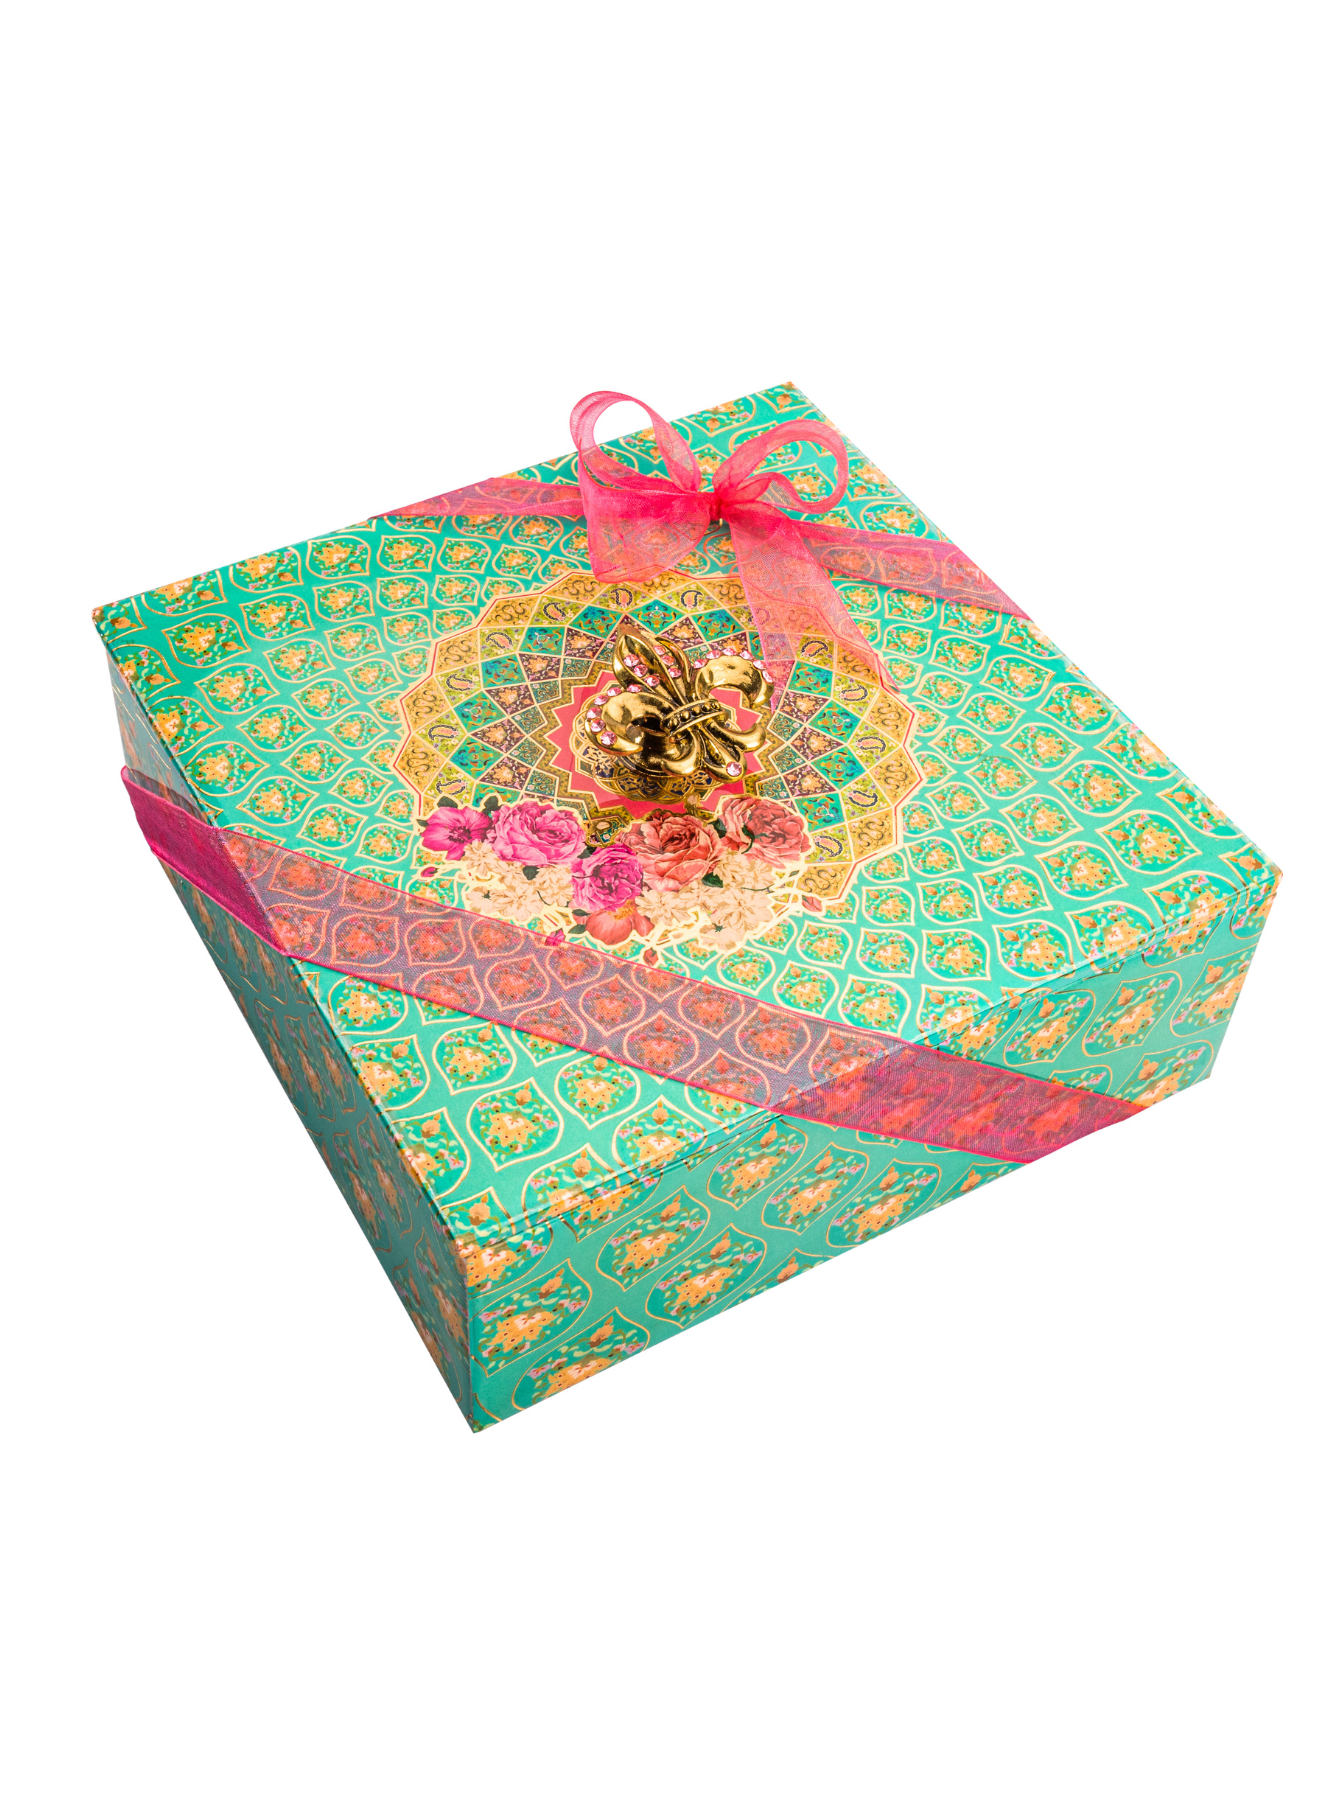 Safawi Dates with Floral Green Lacquered Box with Pink Ribbon (48 Individually Wrapped Pcs)